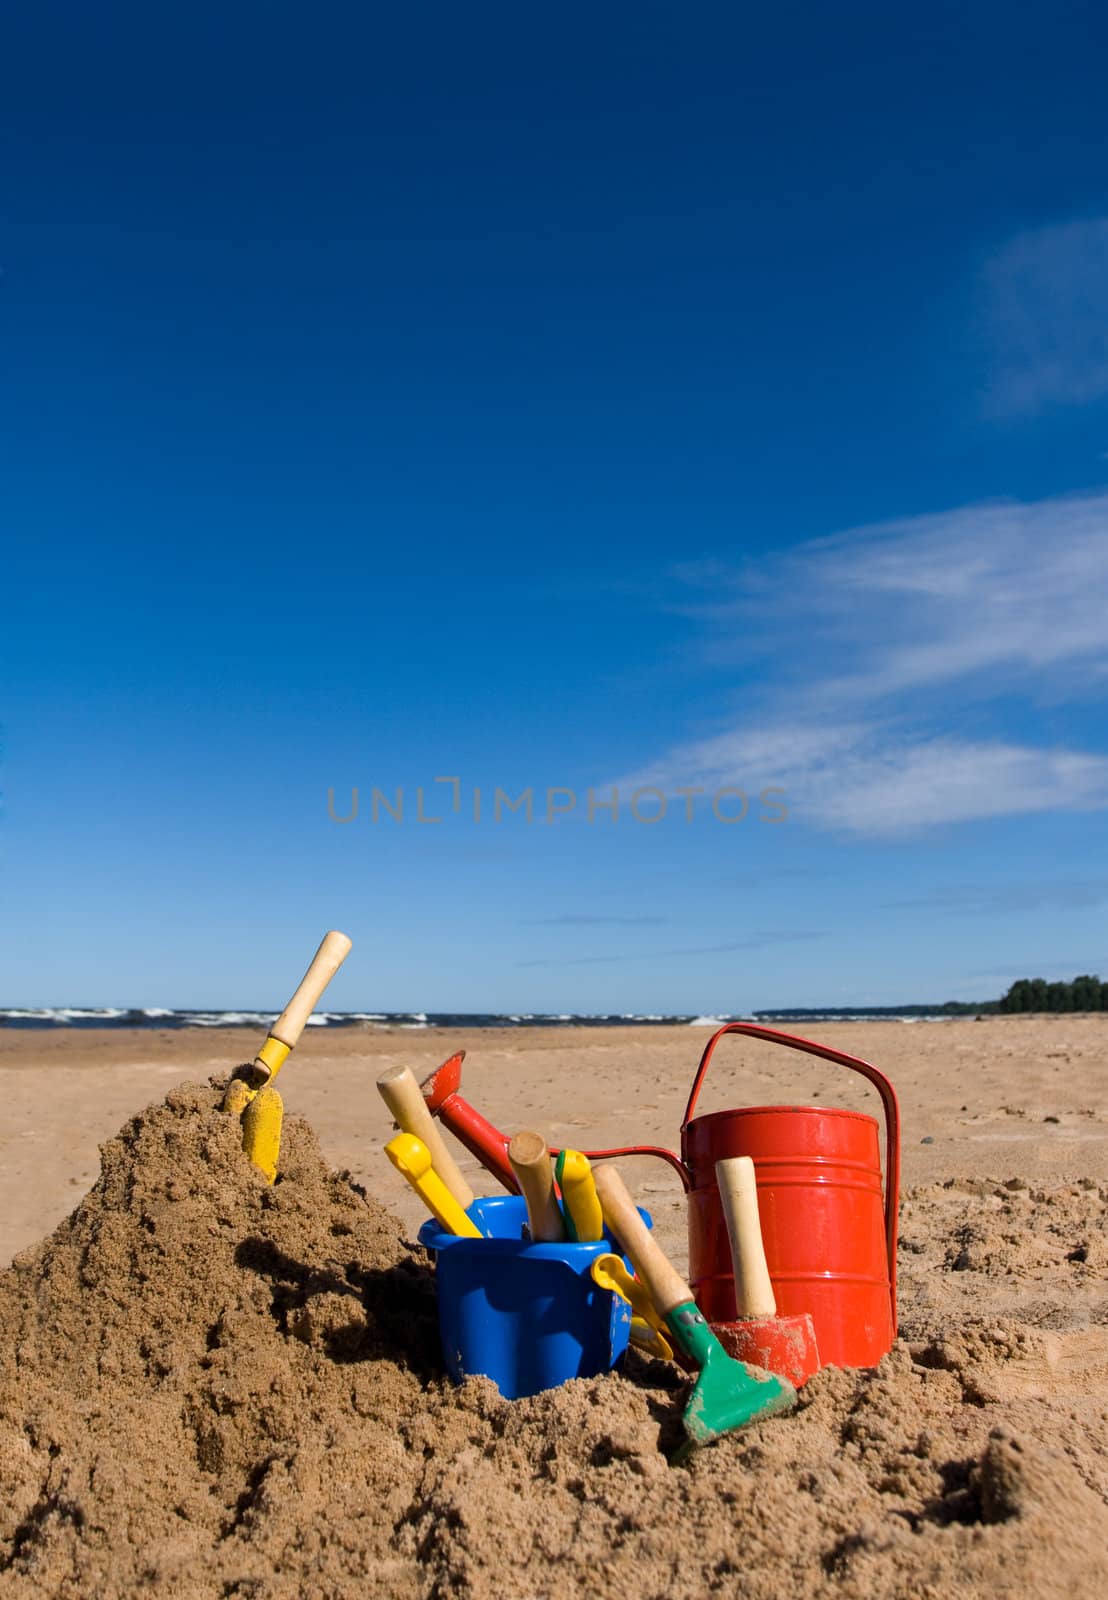 Beach toys in the sandy beach by ints